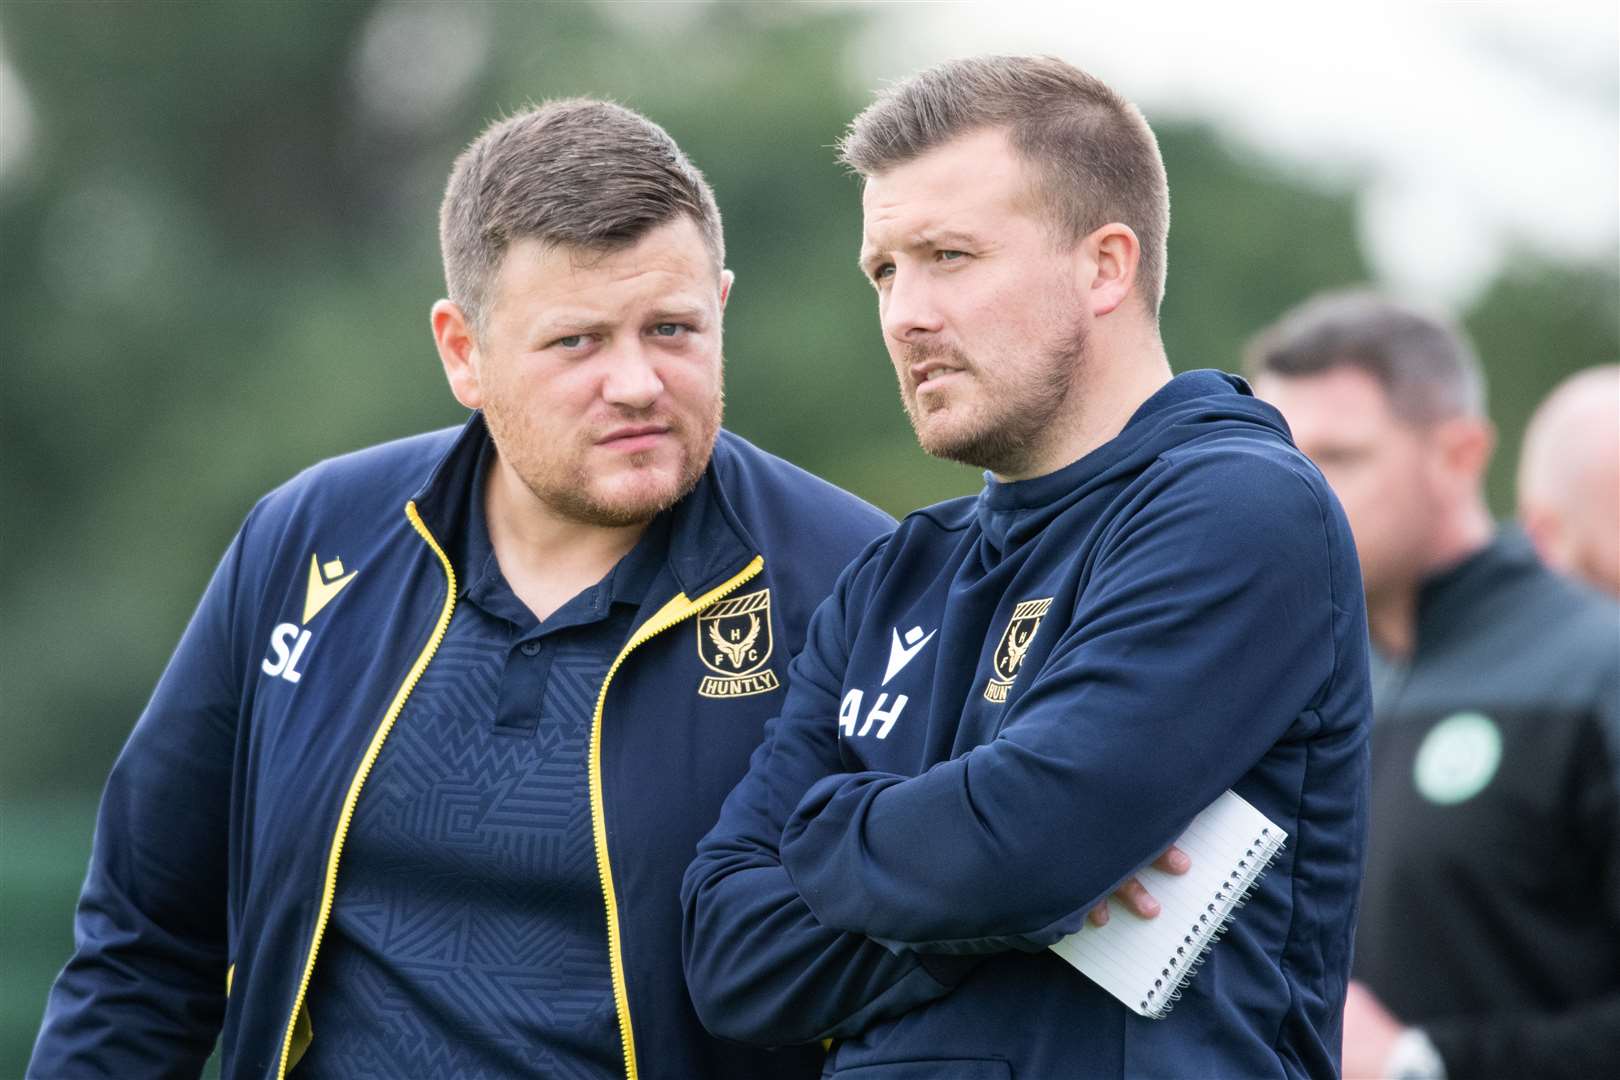 Allan Hale (right) and assistant manager Stefan Laird at Huntly. Picture: Daniel Forsyth